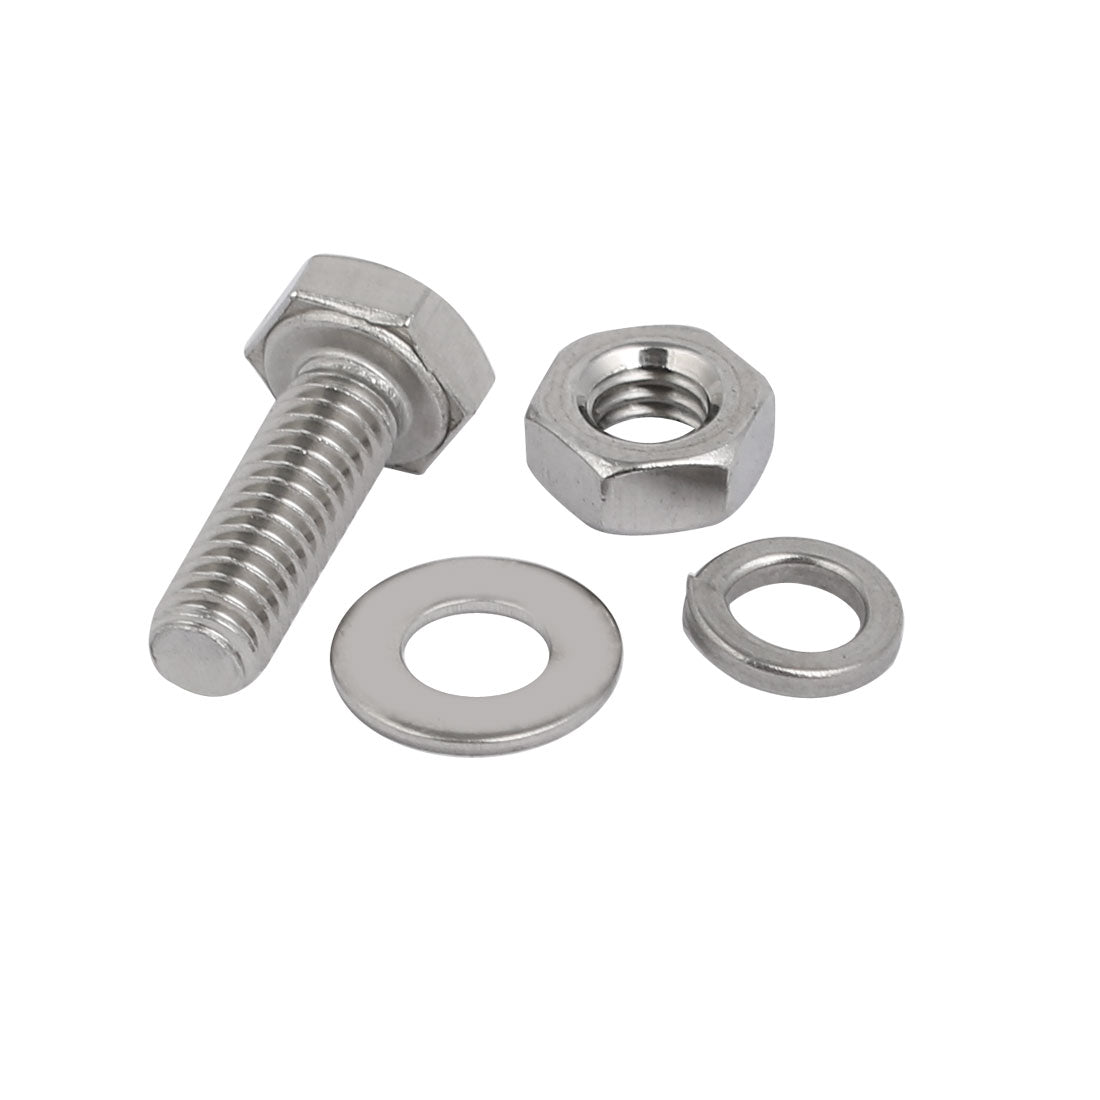 uxcell Uxcell 50pcs 304 Stainless Steel M4x16mm Hex Bolts w Nuts and Washers Assortment Kit